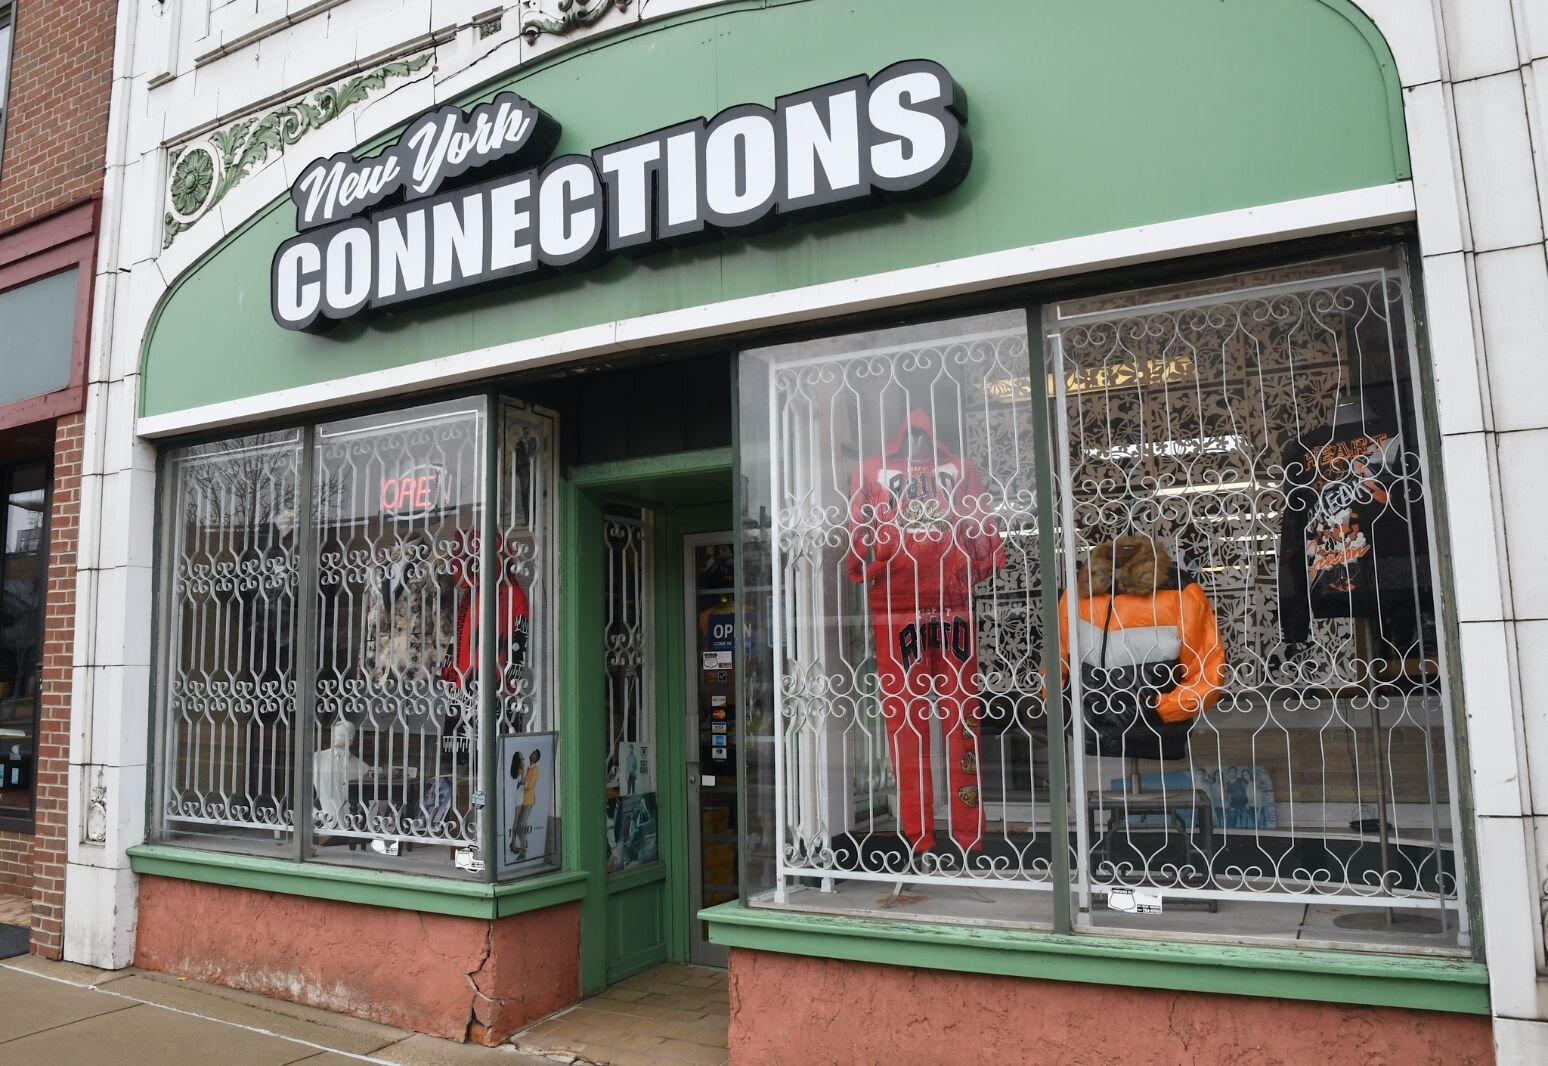 New York Connection is at 30 E. Michigan Avenue in downtown Battle Creek.